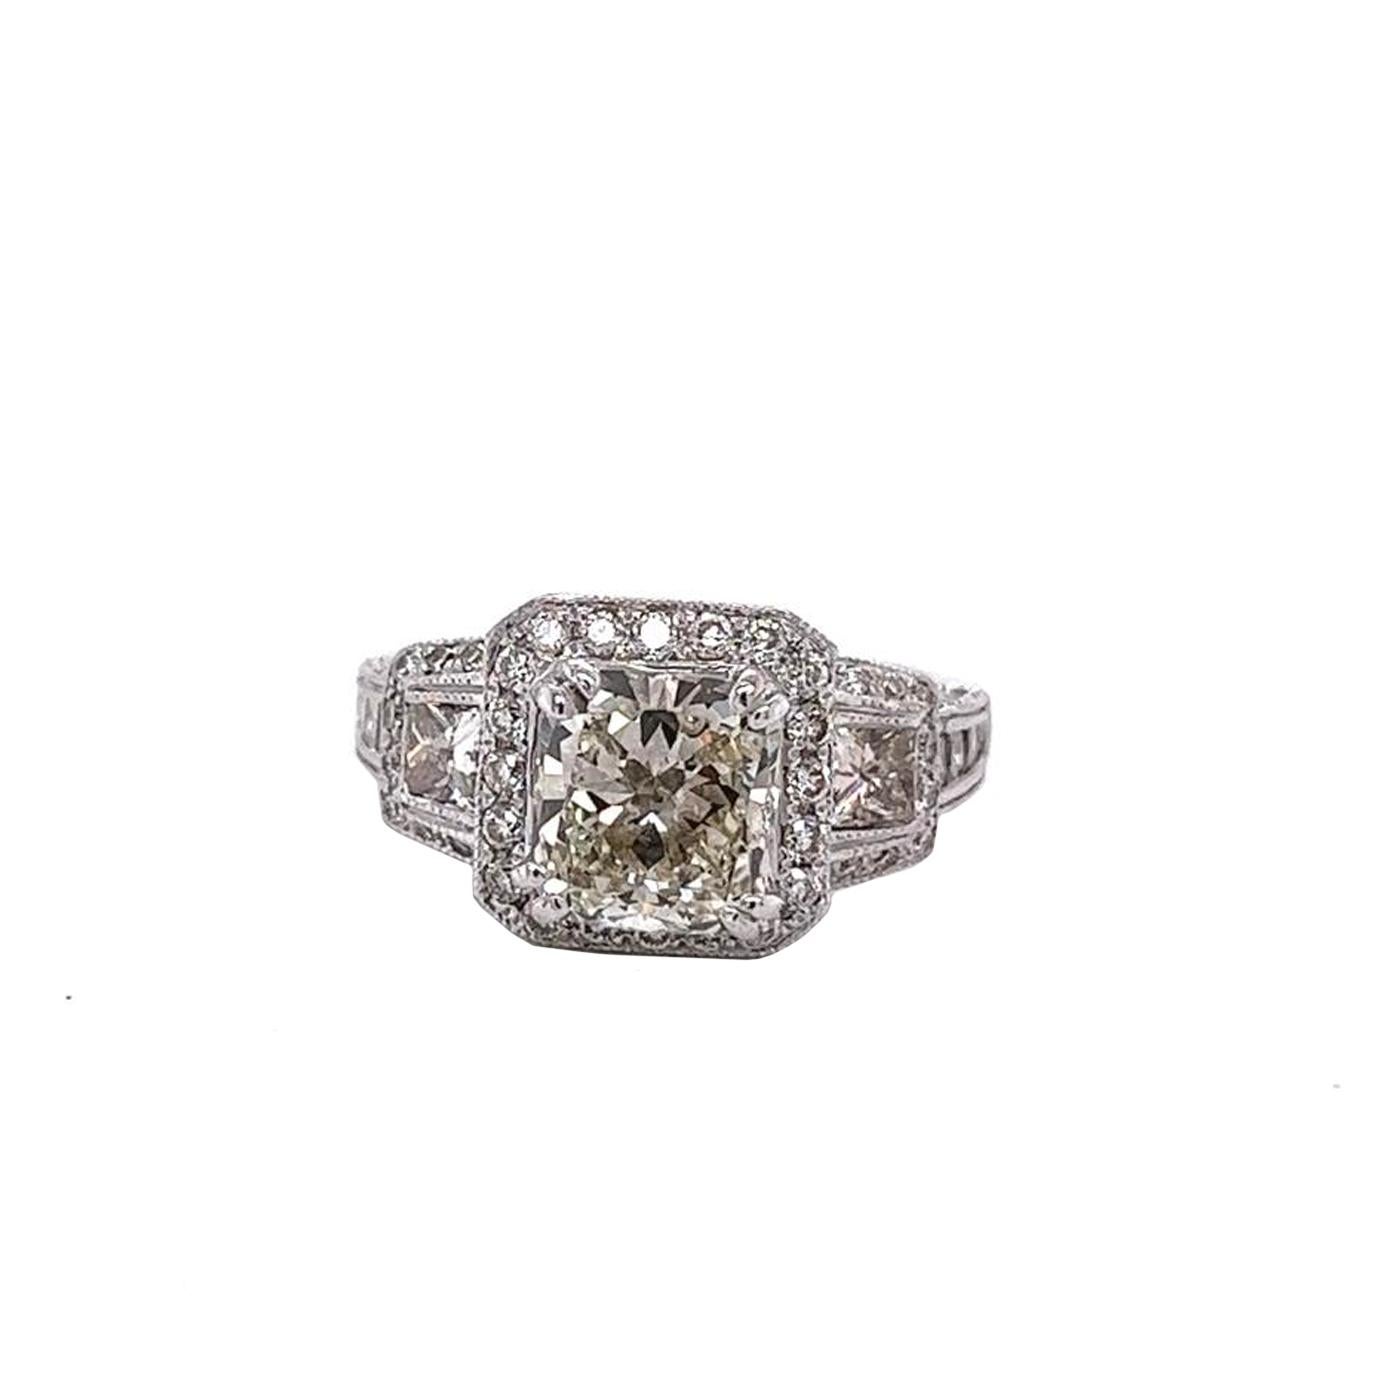 This beautiful Cushion Diamond Ring Magnificently Features a 2.01 Carat Cushion Modified Brilliant Cut with Pave Diamonds Engagement Ring crafted in 14K Gold with dimensions of 7.84 x 7.29 x 4.54mm. It has a Cushion cut Main Stone with Pave